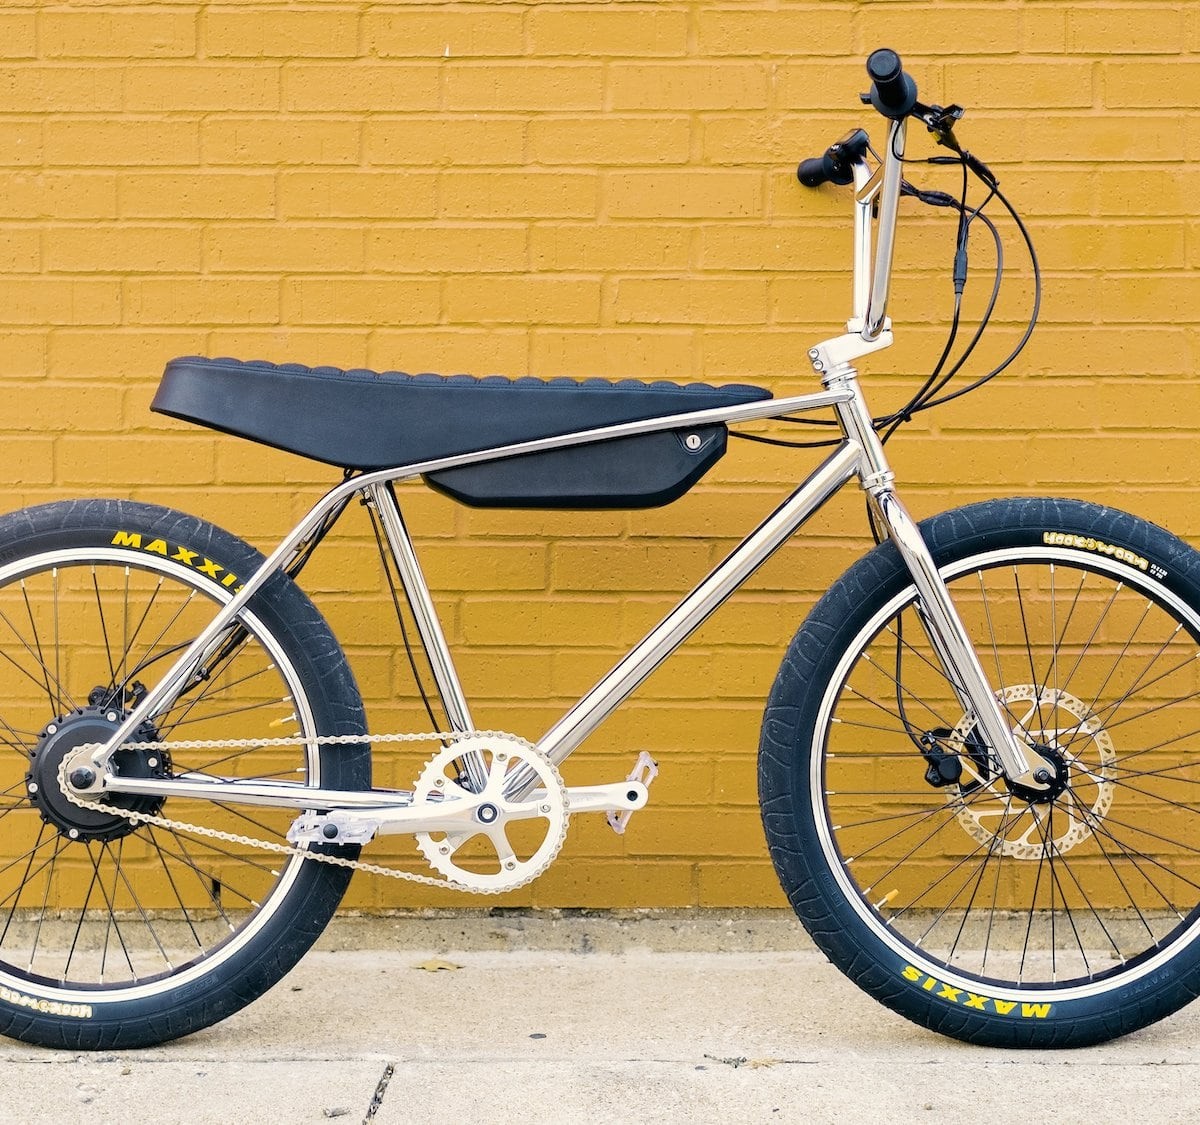 Zooz Bikes Urban Ultralight high-performance eBike is designed for city thrill seekers